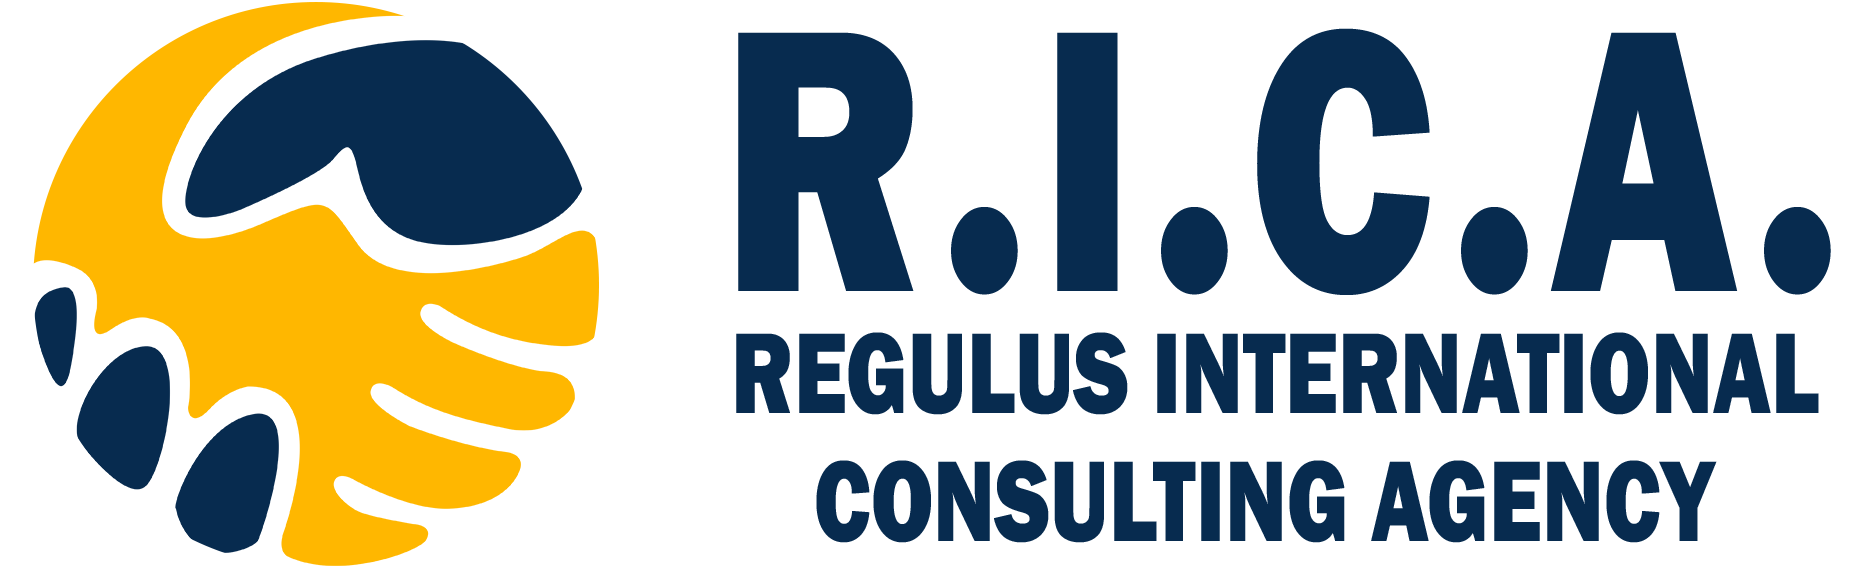 R.I.C.A. - Regulus International Consulting Agency